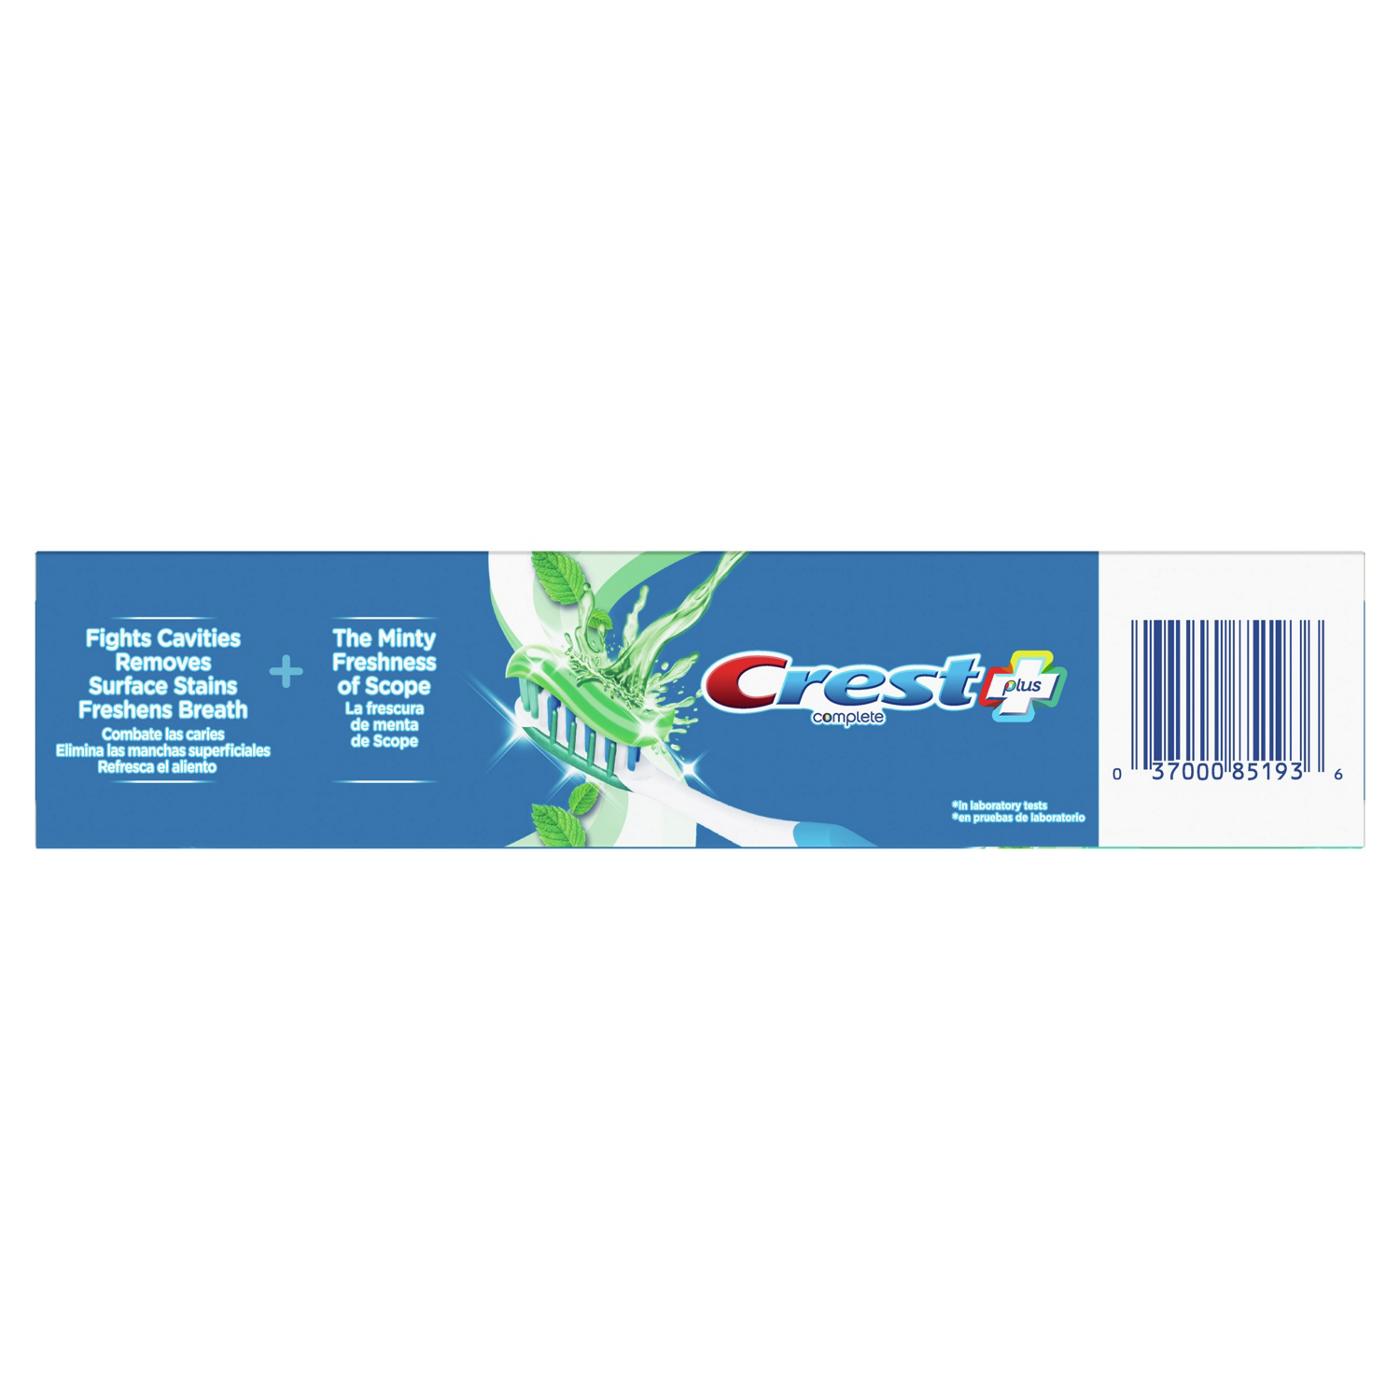 Crest Complete + Scope Whitening Toothpaste - Minty Fresh Striped; image 5 of 10